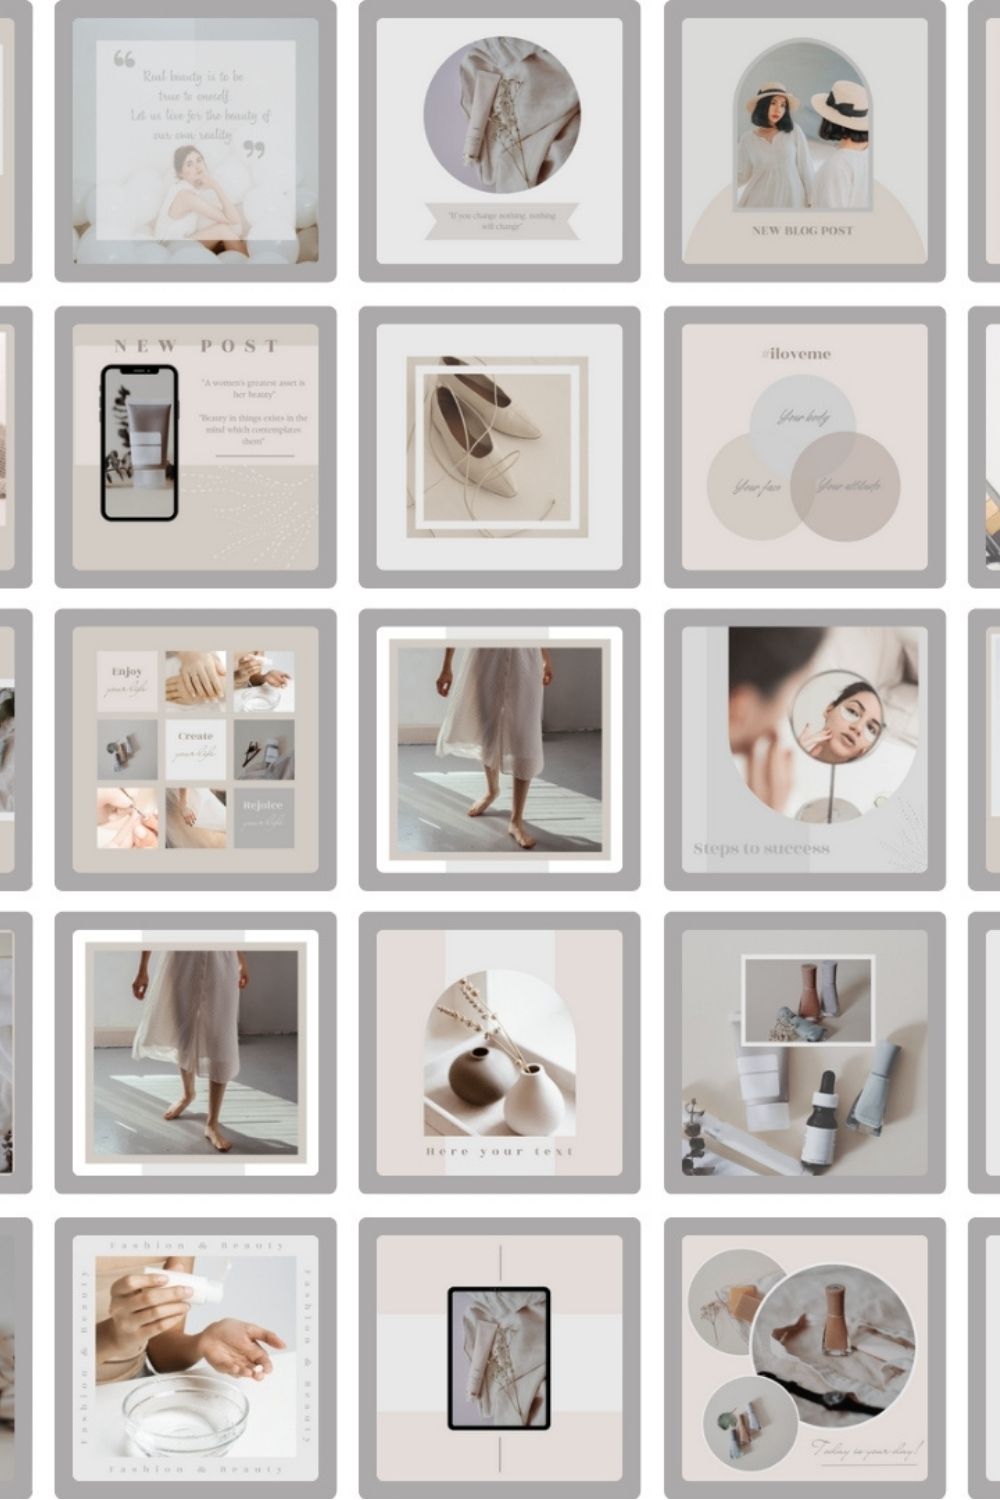 30 Nude Instagram post templates, Business Instagram templates, Editable in Canva promotional post,Girl branding templates, Social Media Booster, Small Business IG templates, Light feed brand